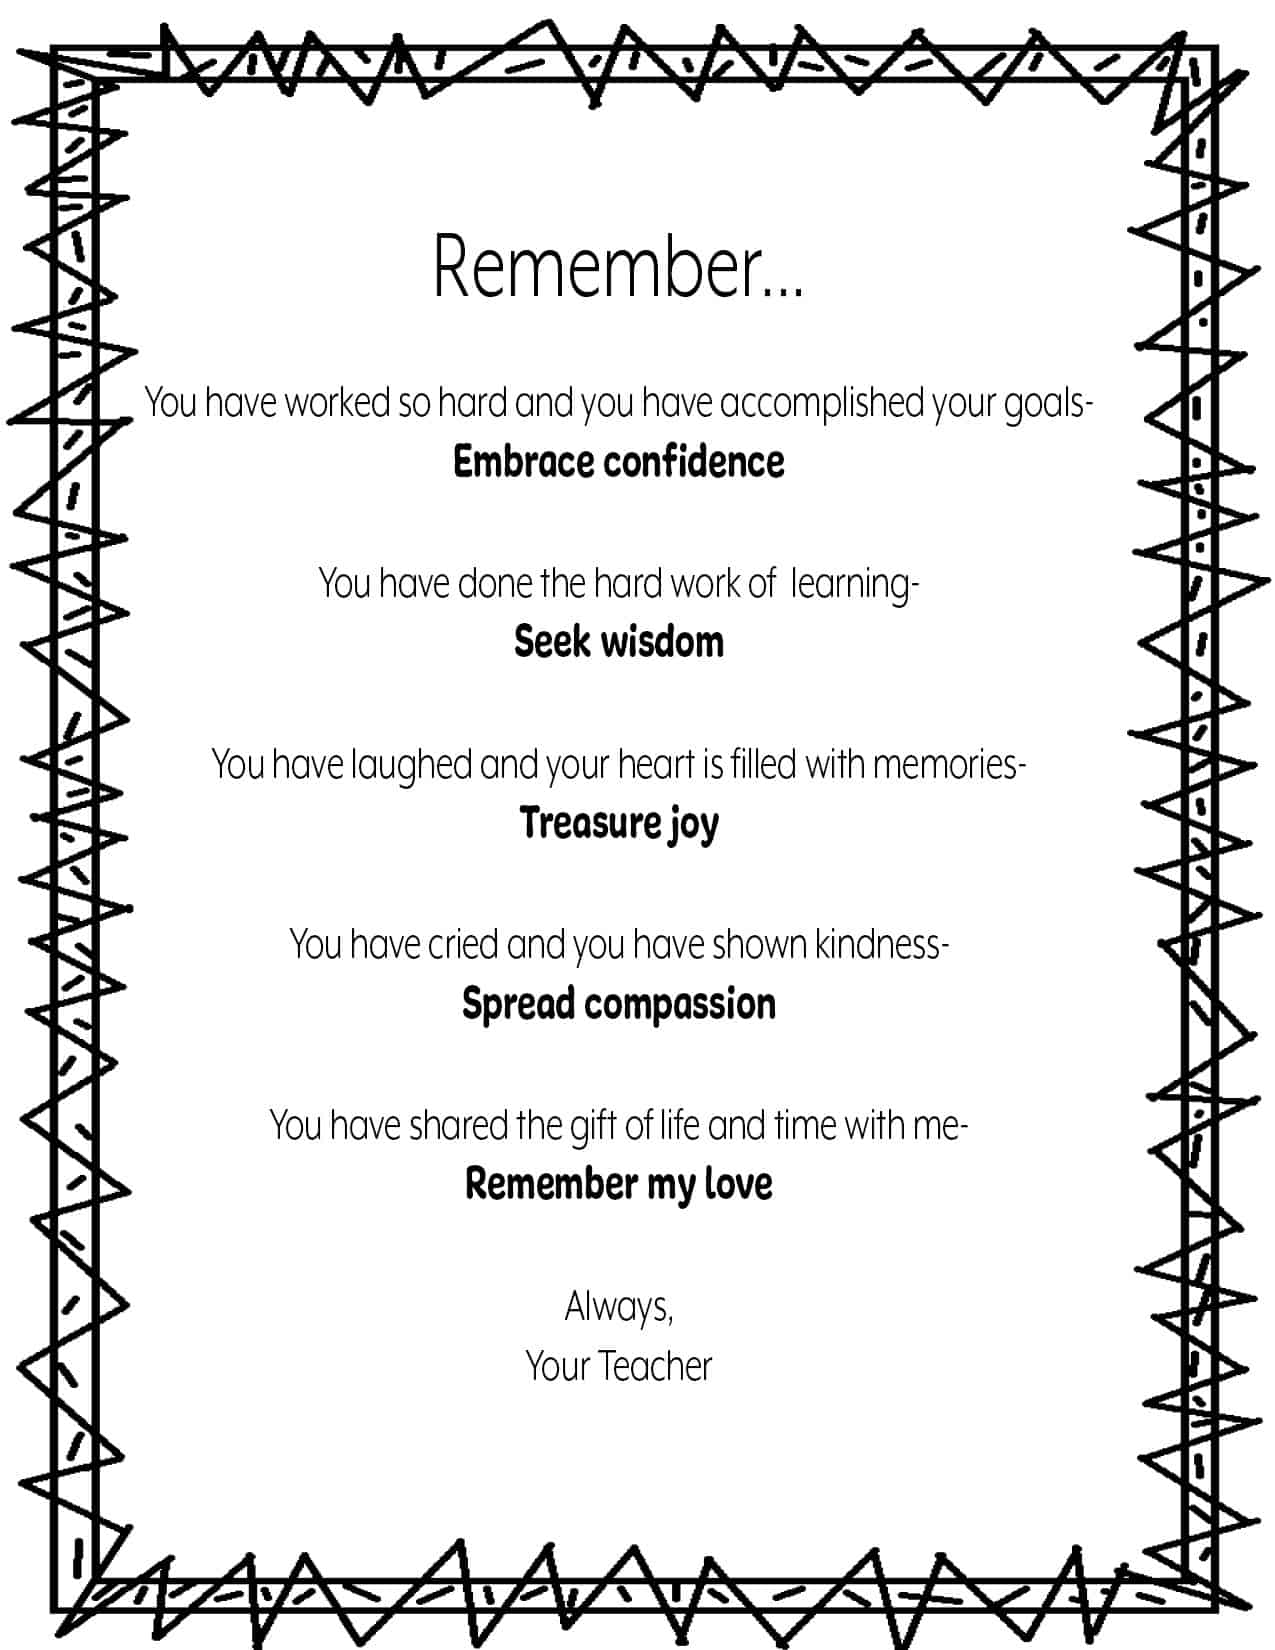 end of year poem for teacher